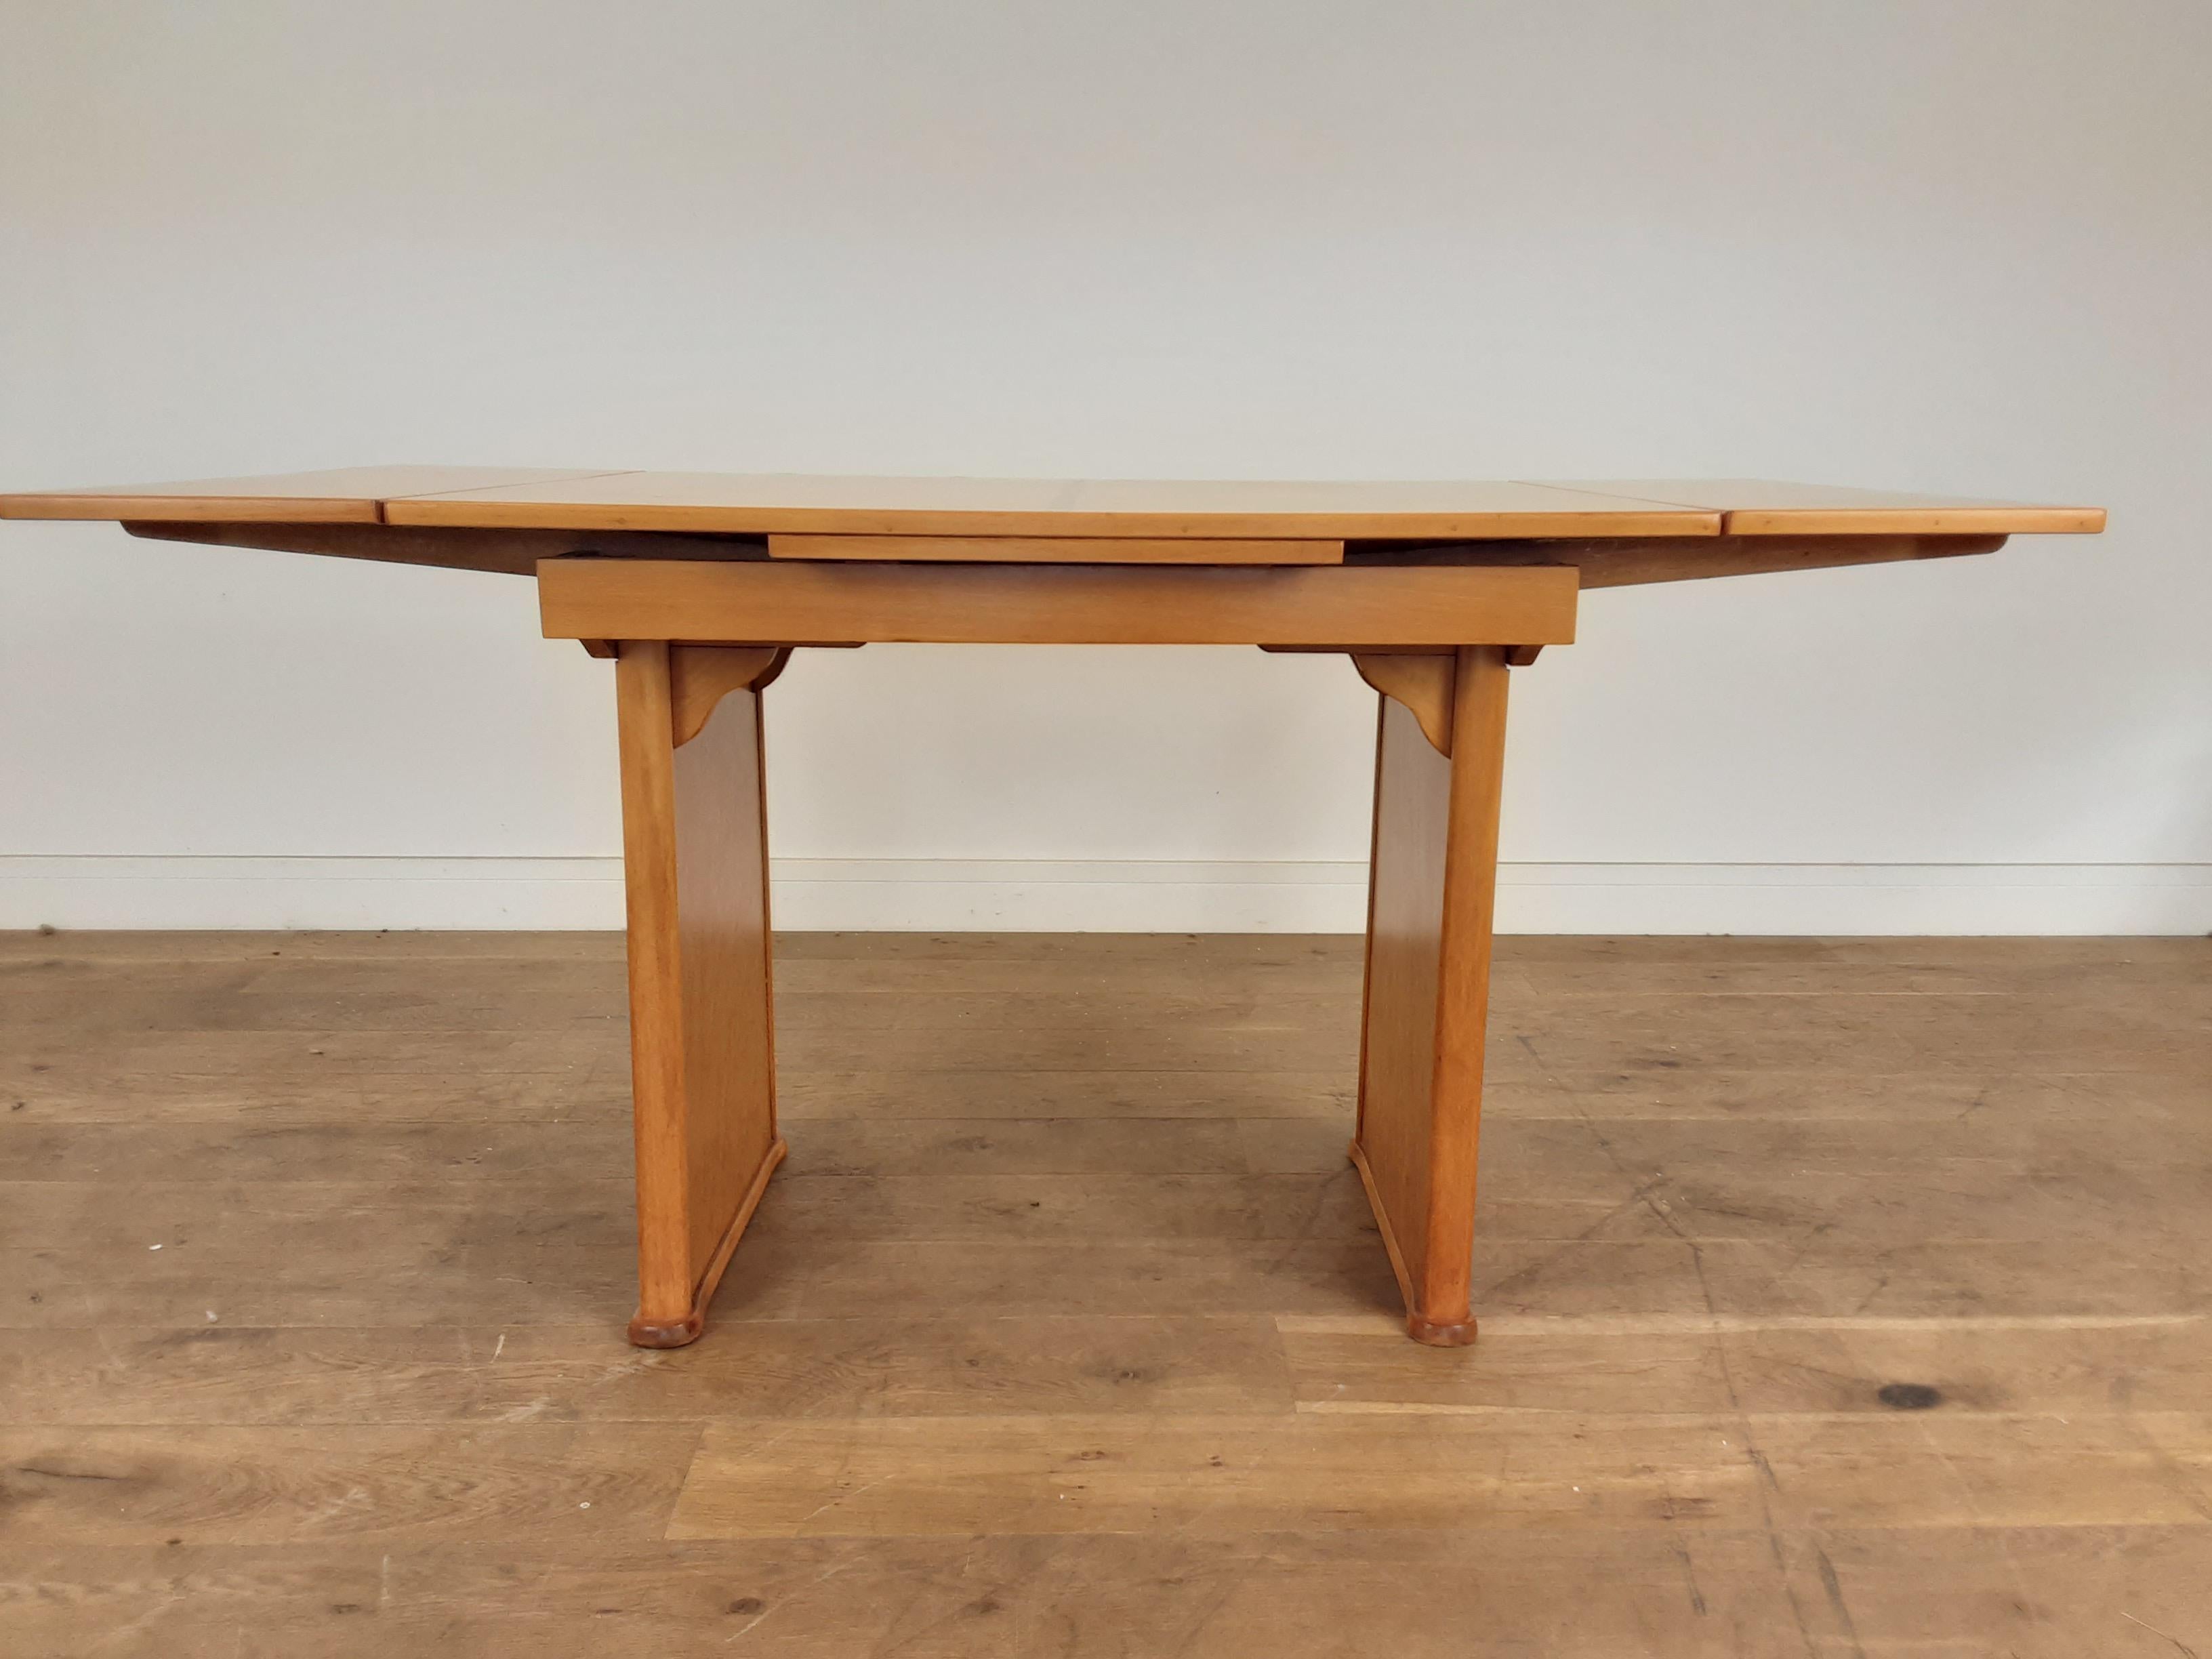 Art Deco extendable dining table.
A pretty dining table in a golden bird's-eye maple with a central band of walnut decoration.
pullout / pull-out leaves at either end giving you an option to extend to 125cm or 153cm with each leaf giving